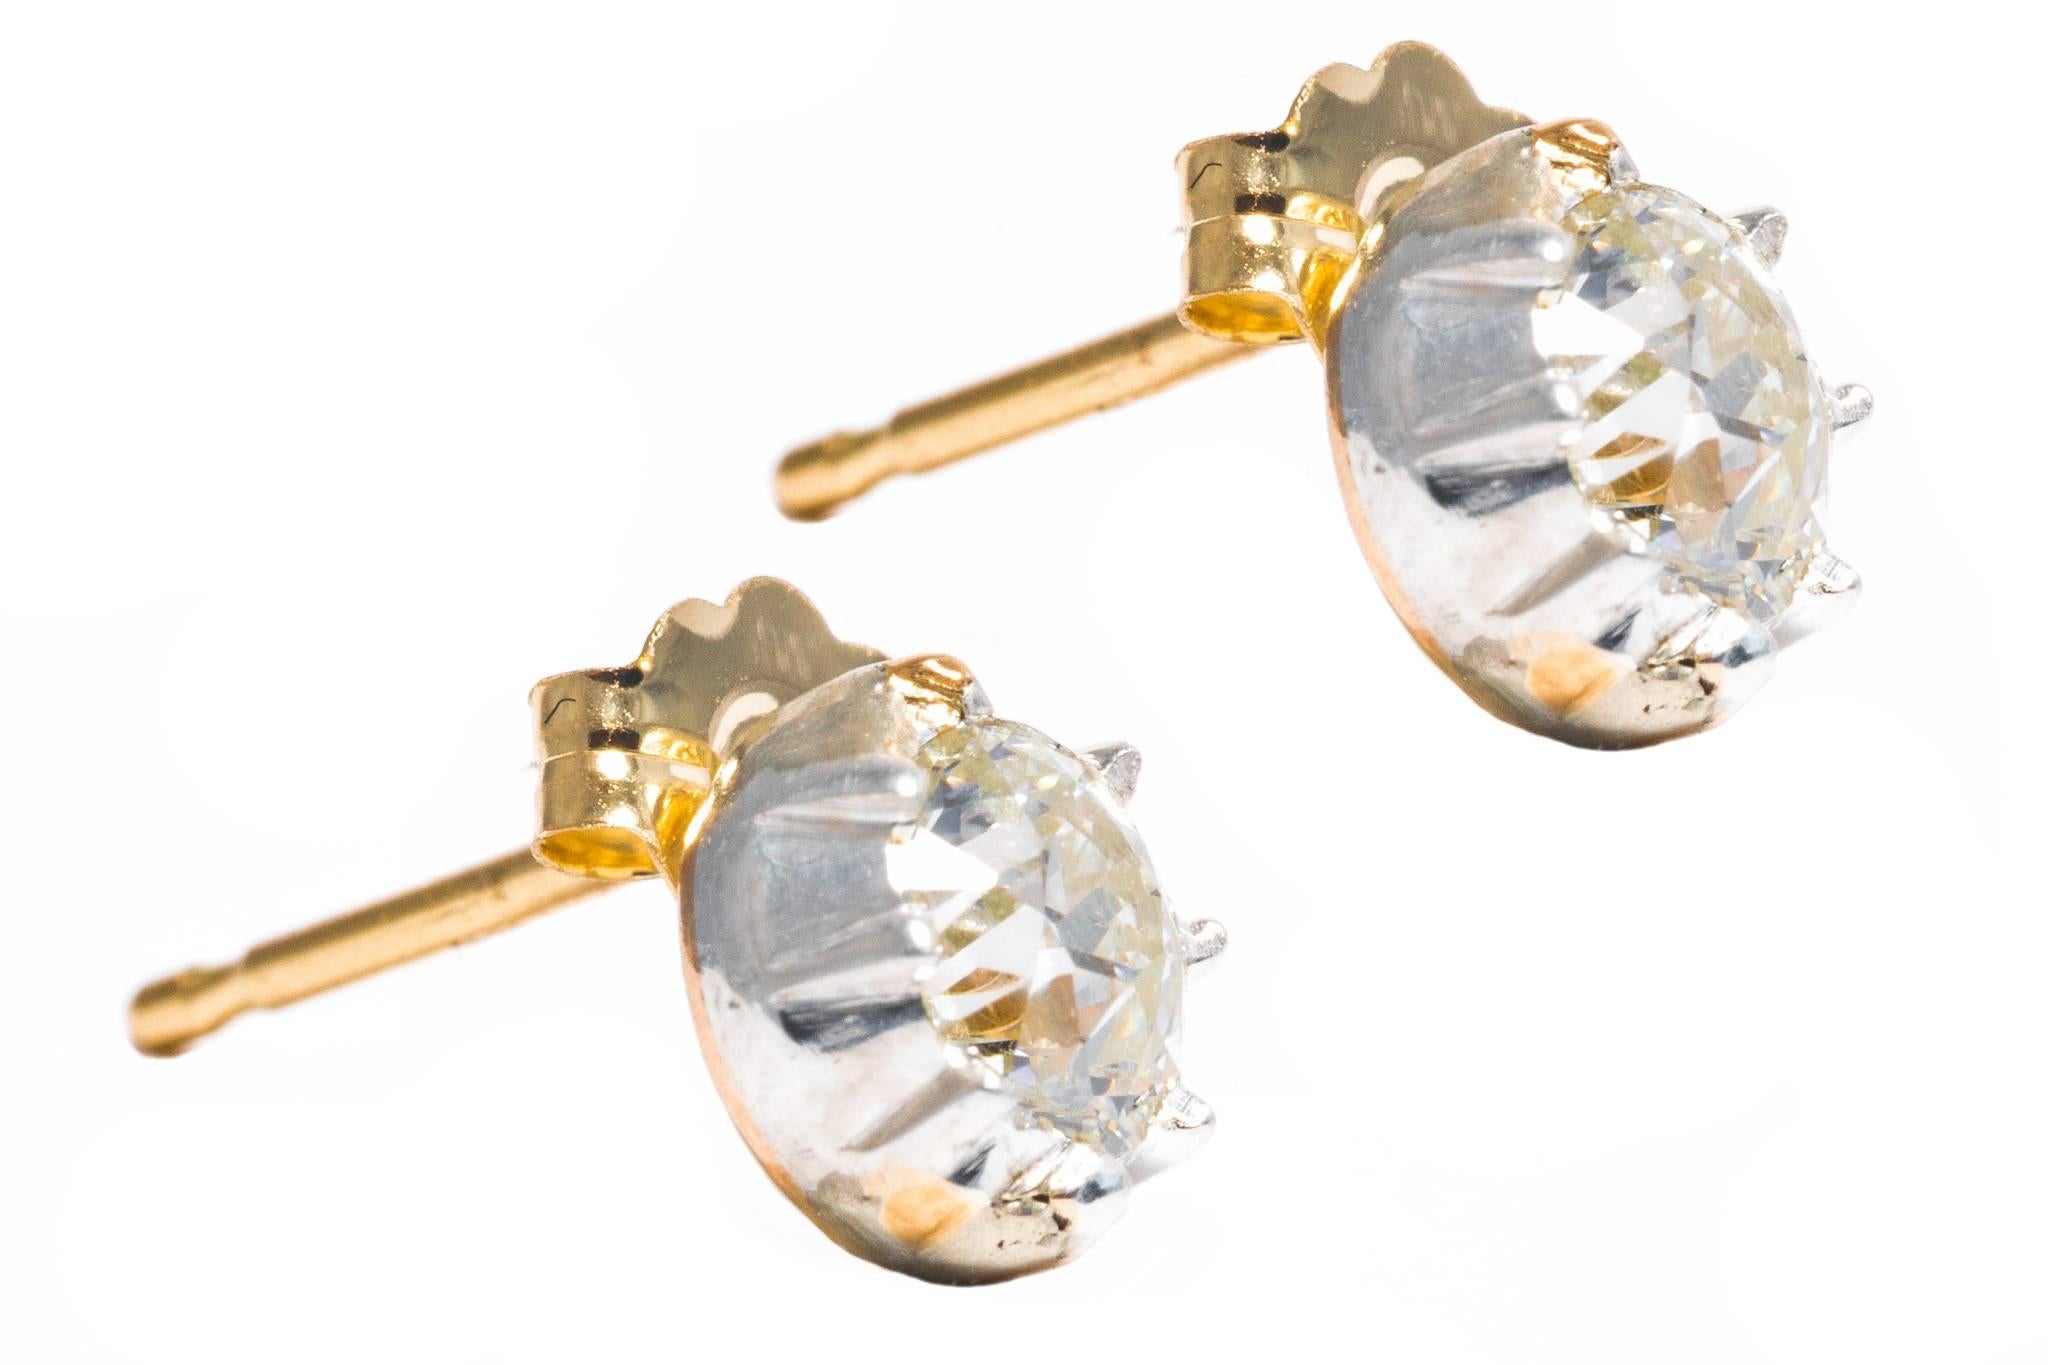 Beacon Hill Jewelers Presents:

A pair of  diamond stud earrings in silver and yellow gold. Crafted of a silver top mated to a backing of yellow gold as is traditional of the georgian period, these earrings boast a pair of high quality antique mine